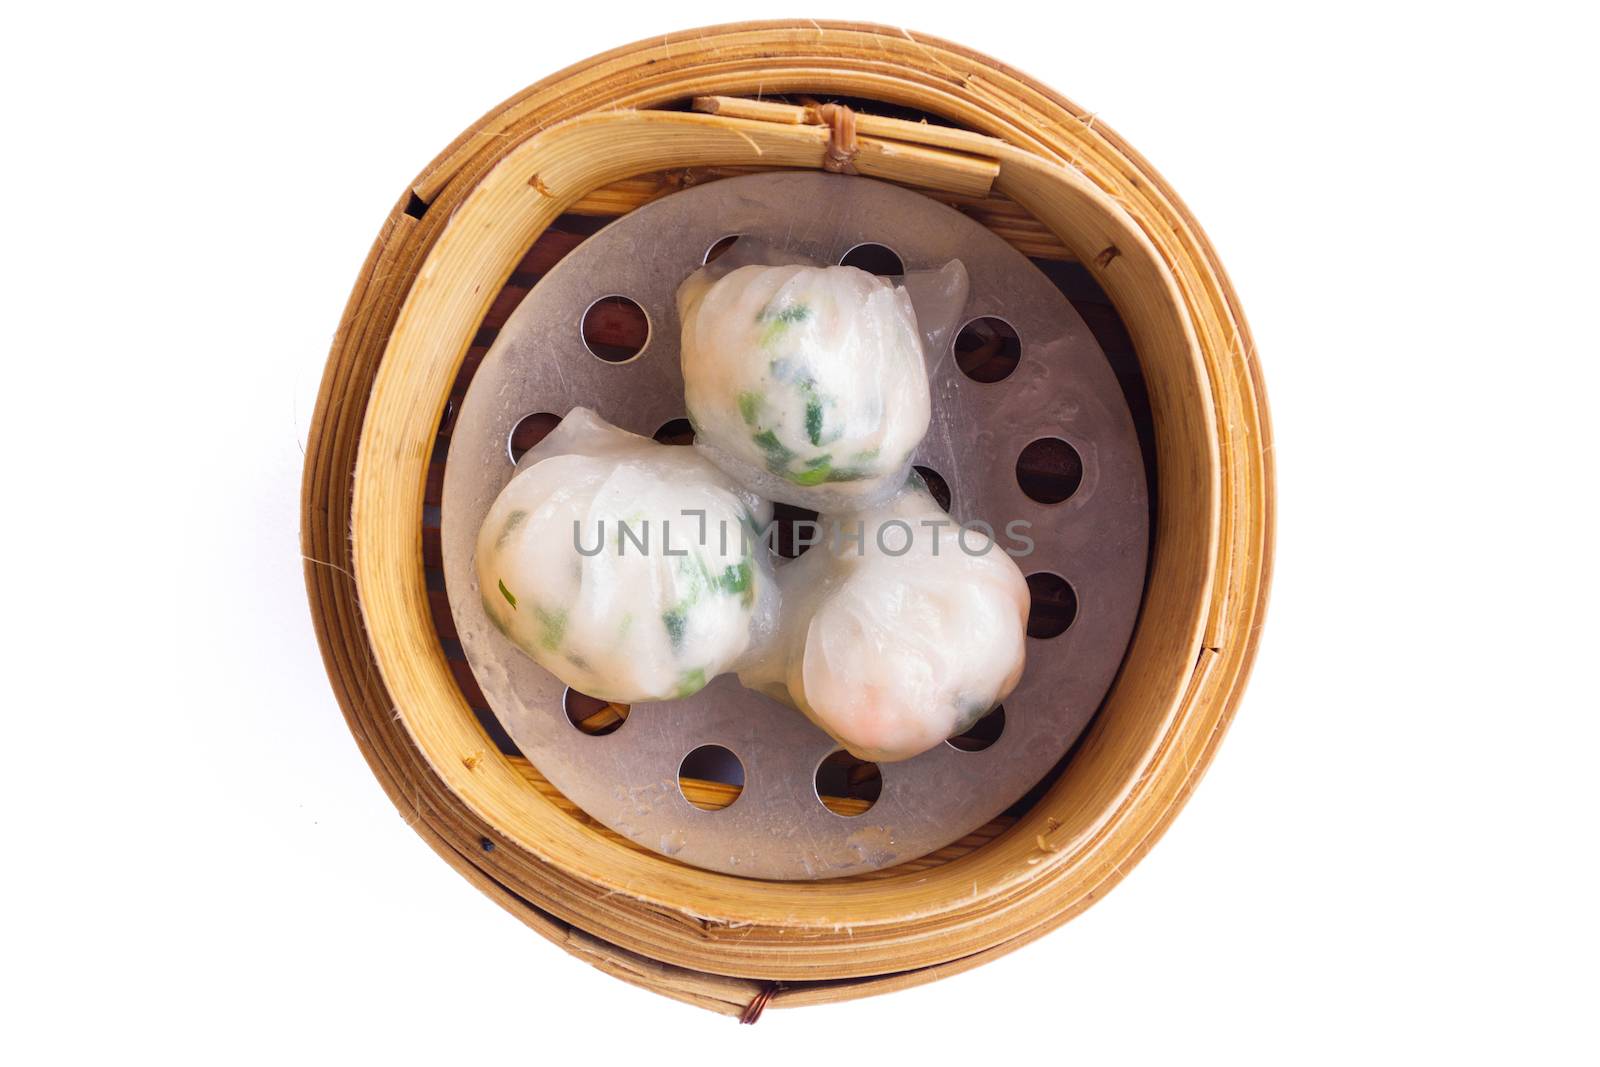 Dimsum in the steam basket . Chinese dimsum steamer prawn isolated on white background.